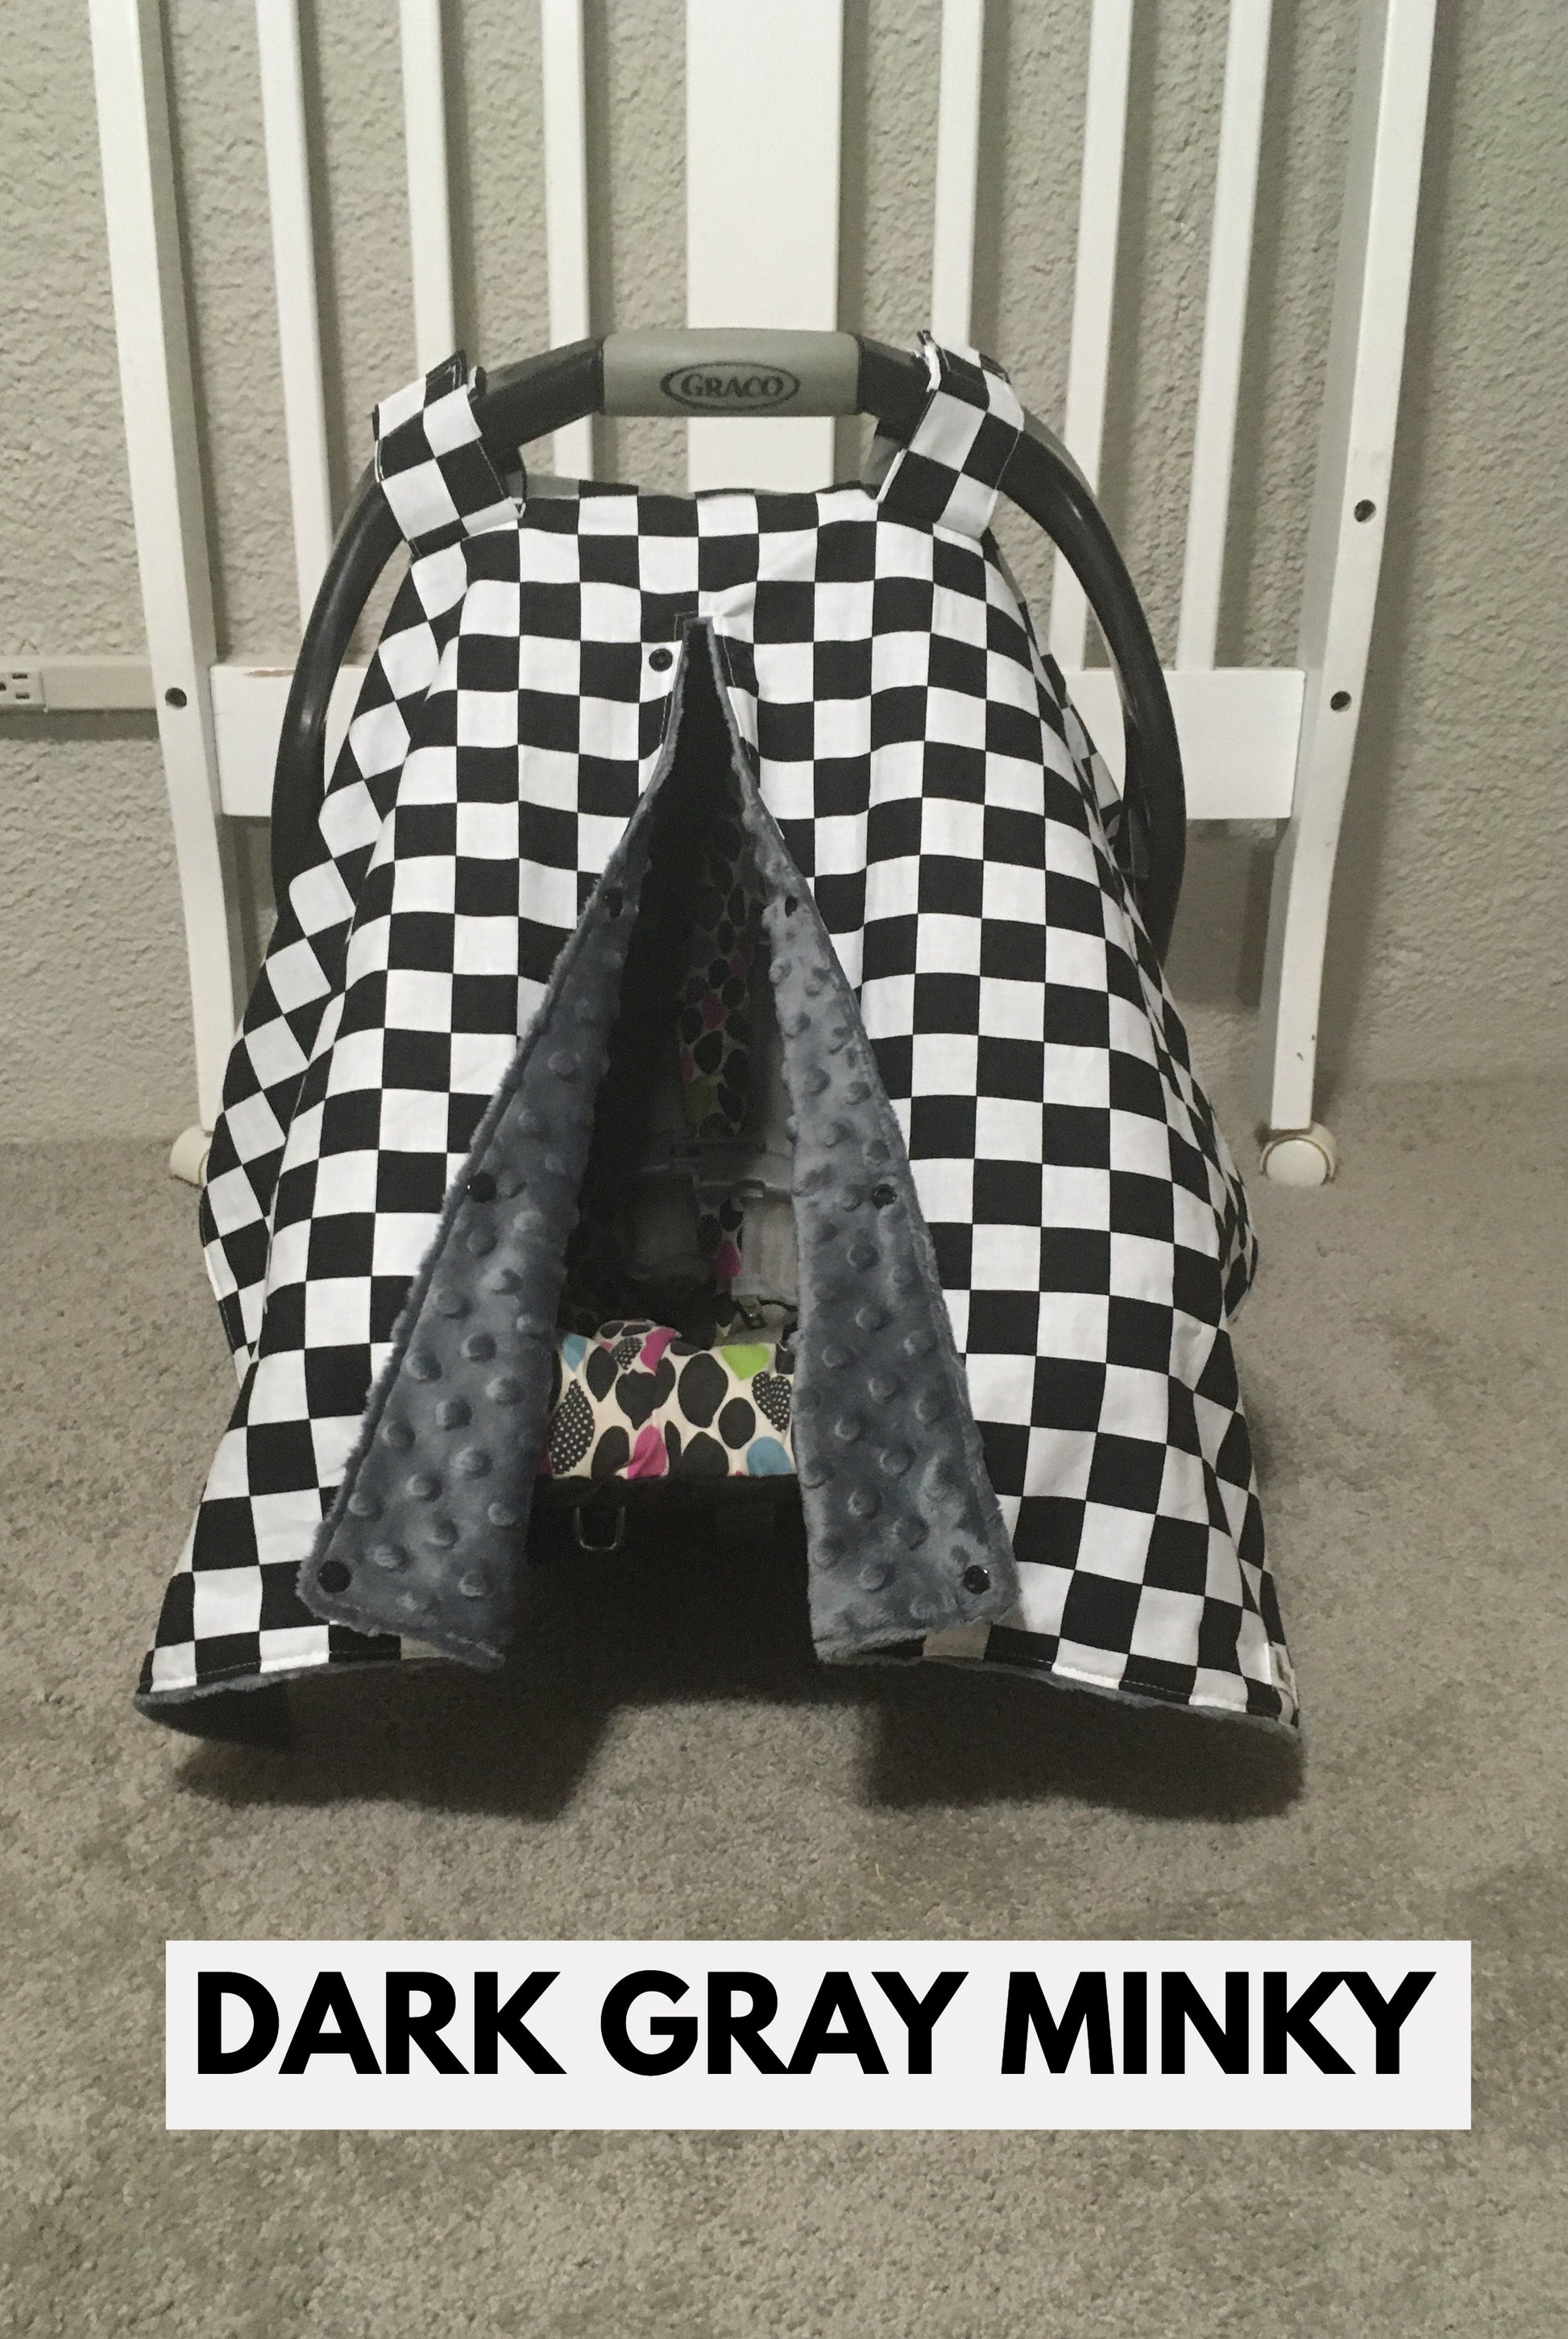 racing check canopy/car seat cover shown in dark gray minky in the open option